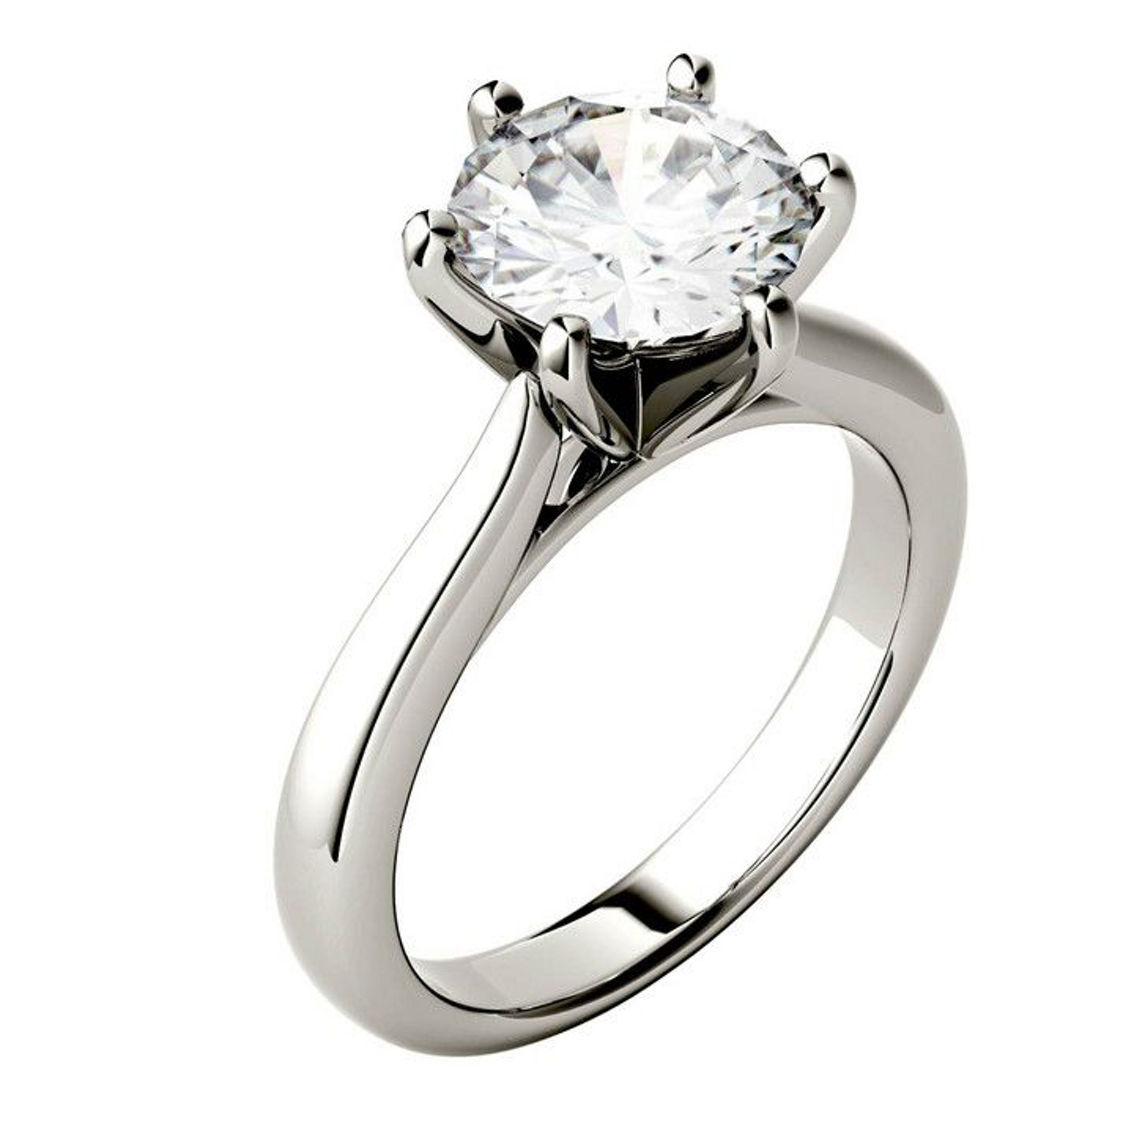 Charles & Colvard 1.90cttw Moissanite Solitaire Engagement Ring in 14k White Gold - Image 2 of 5